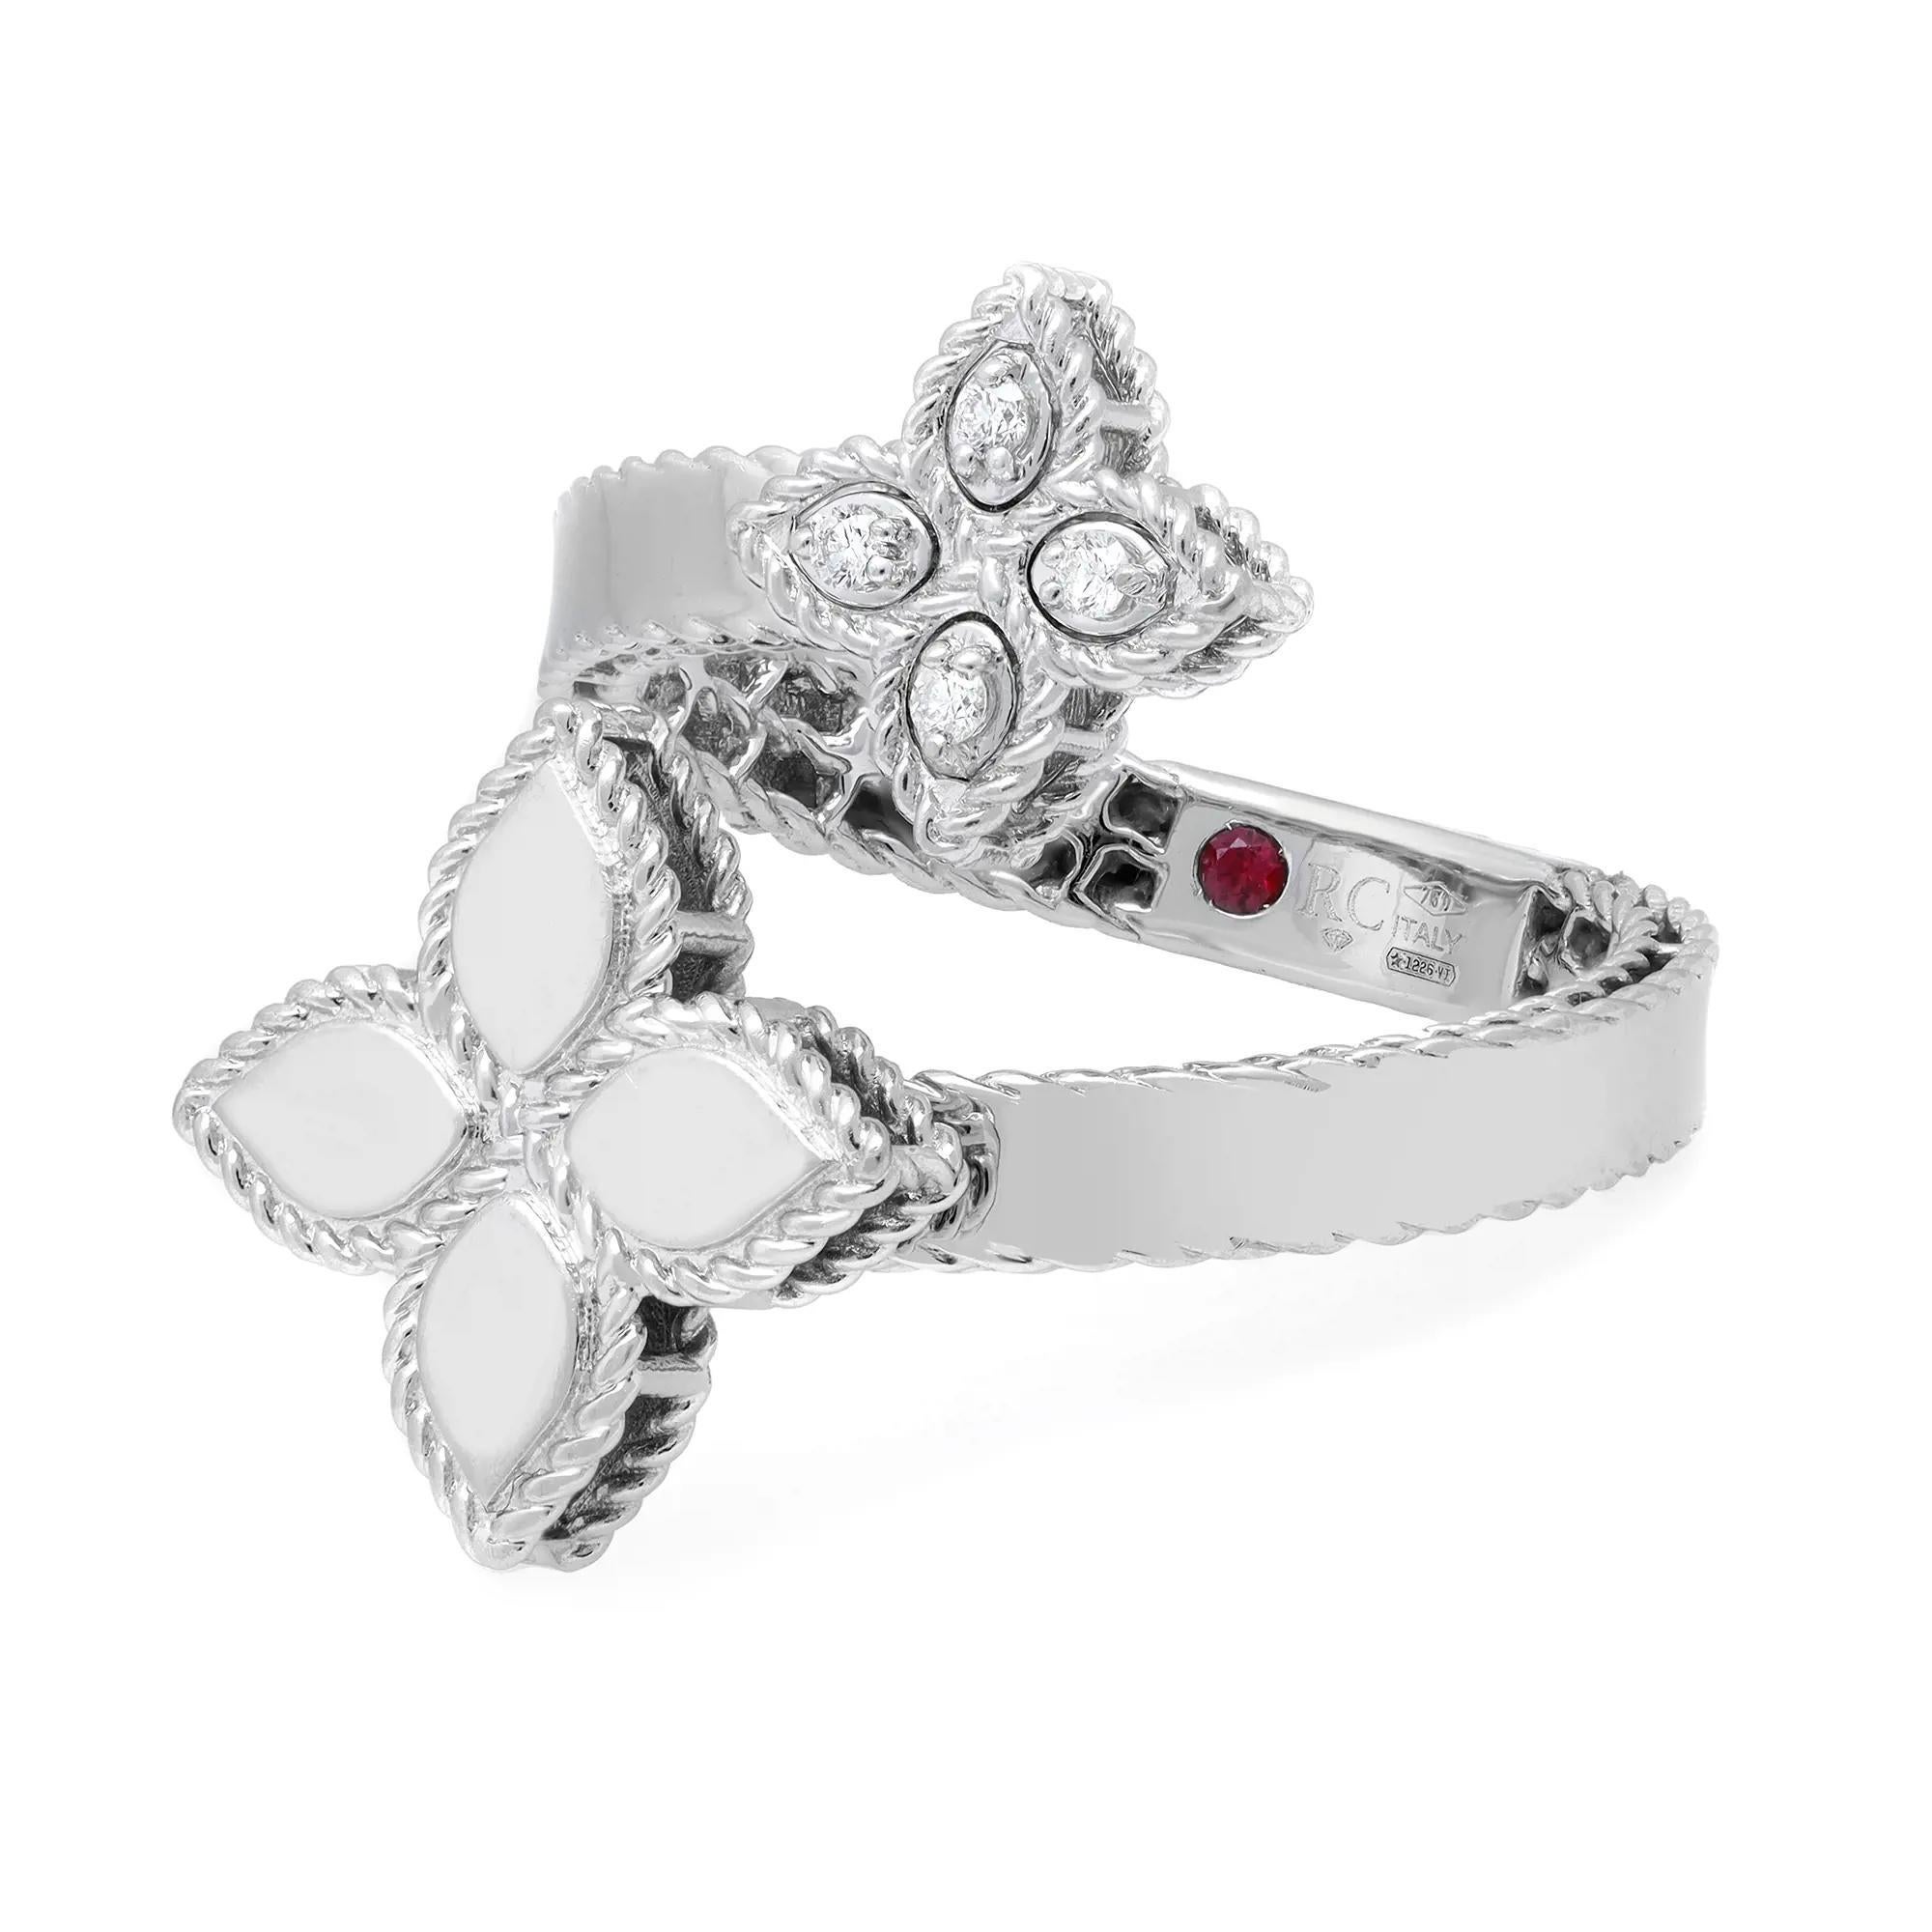 This beautiful Roberto Coin princess flower ring is crafted in fine 18K white gold. Adorned with four shimmering round brilliant cut diamonds with a hidden internal round cut ruby. Total diamond weight: 0.05 carat. Ring size: 6. Total weight: 5.11